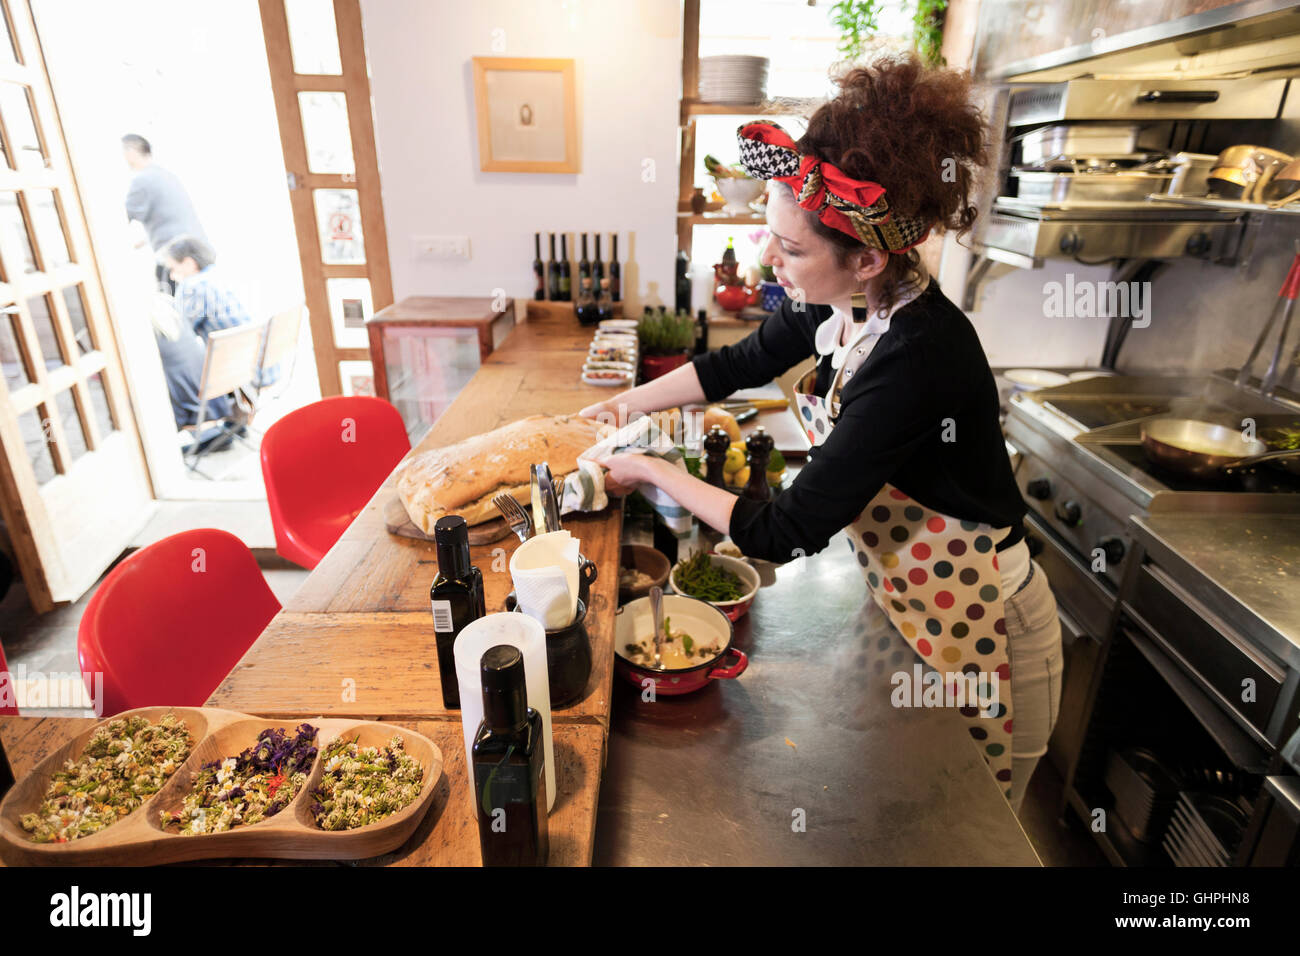 Female cook putting fresh food on bar counter Stock Photo